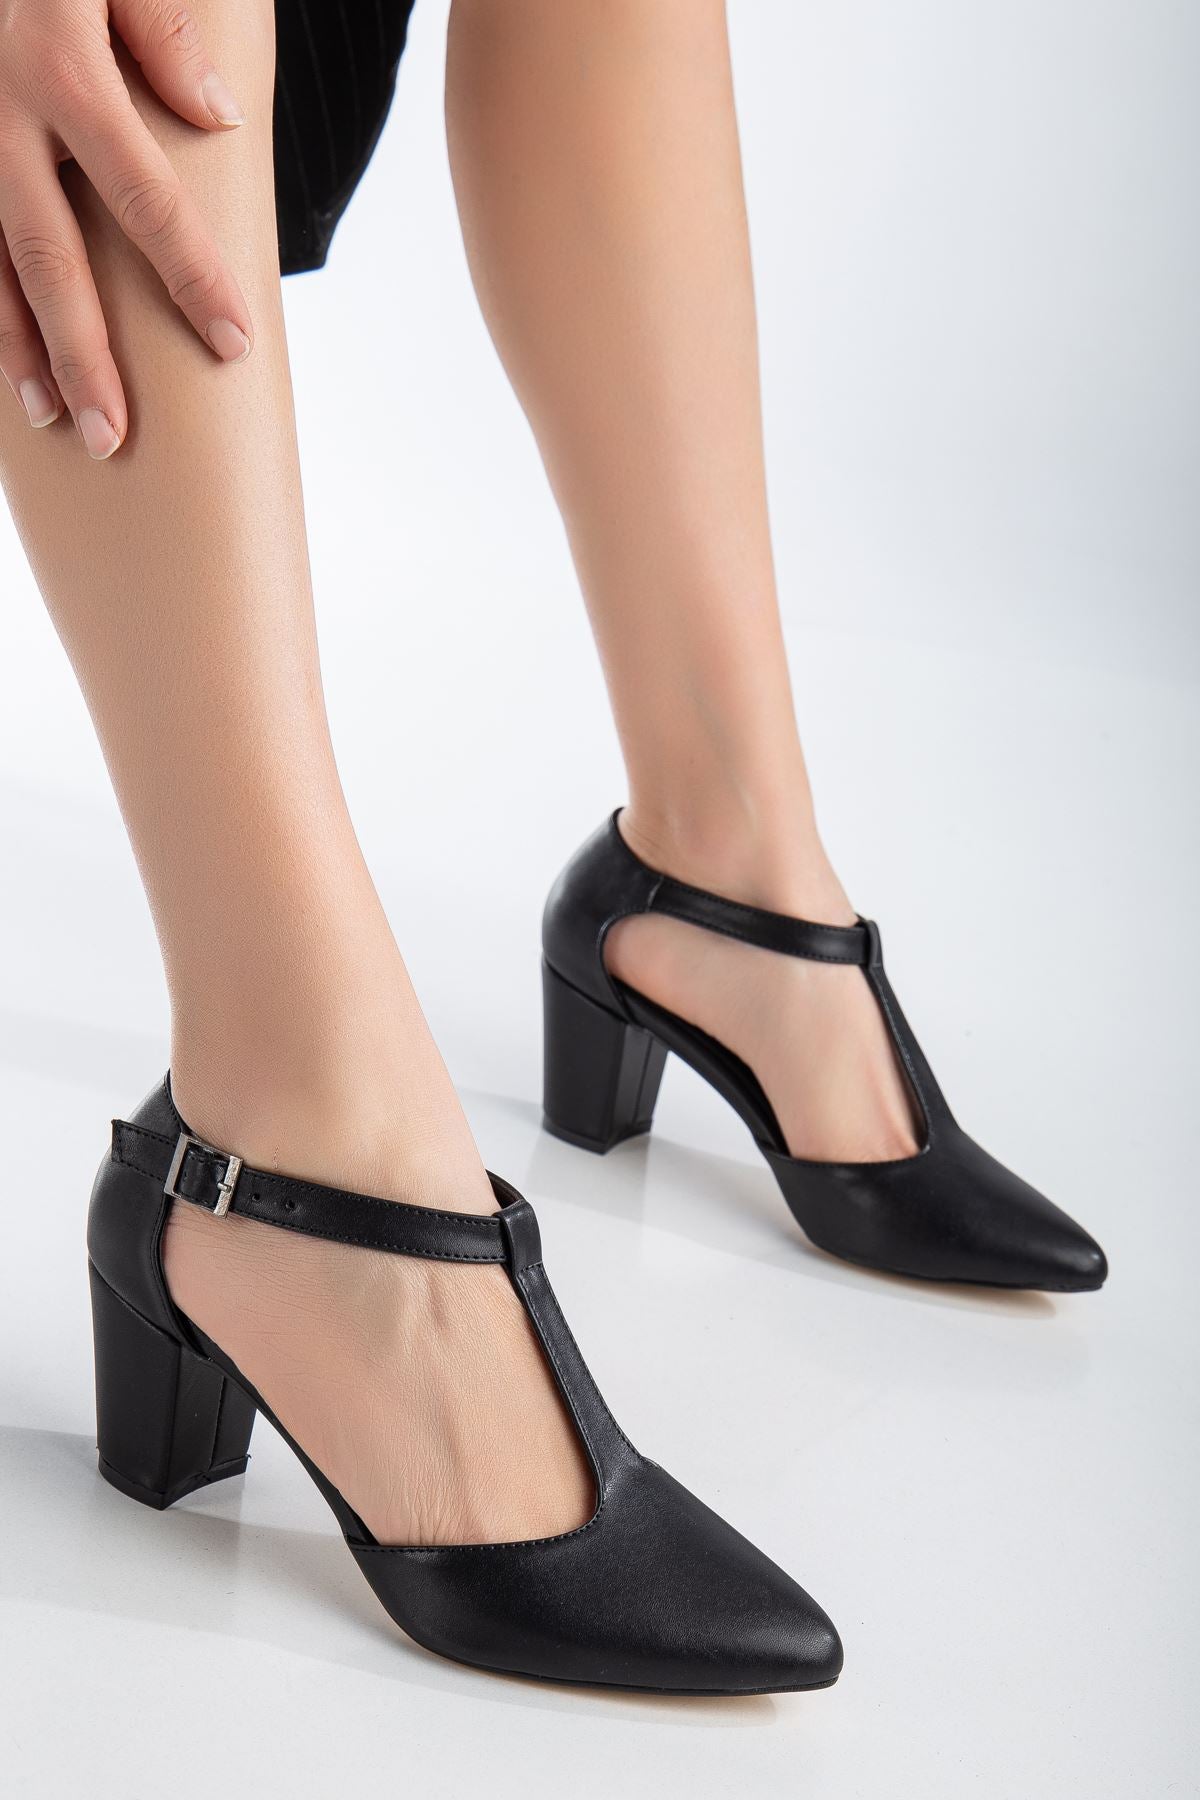 Niven Black Leather Heeled Women's Shoes - STREETMODE™